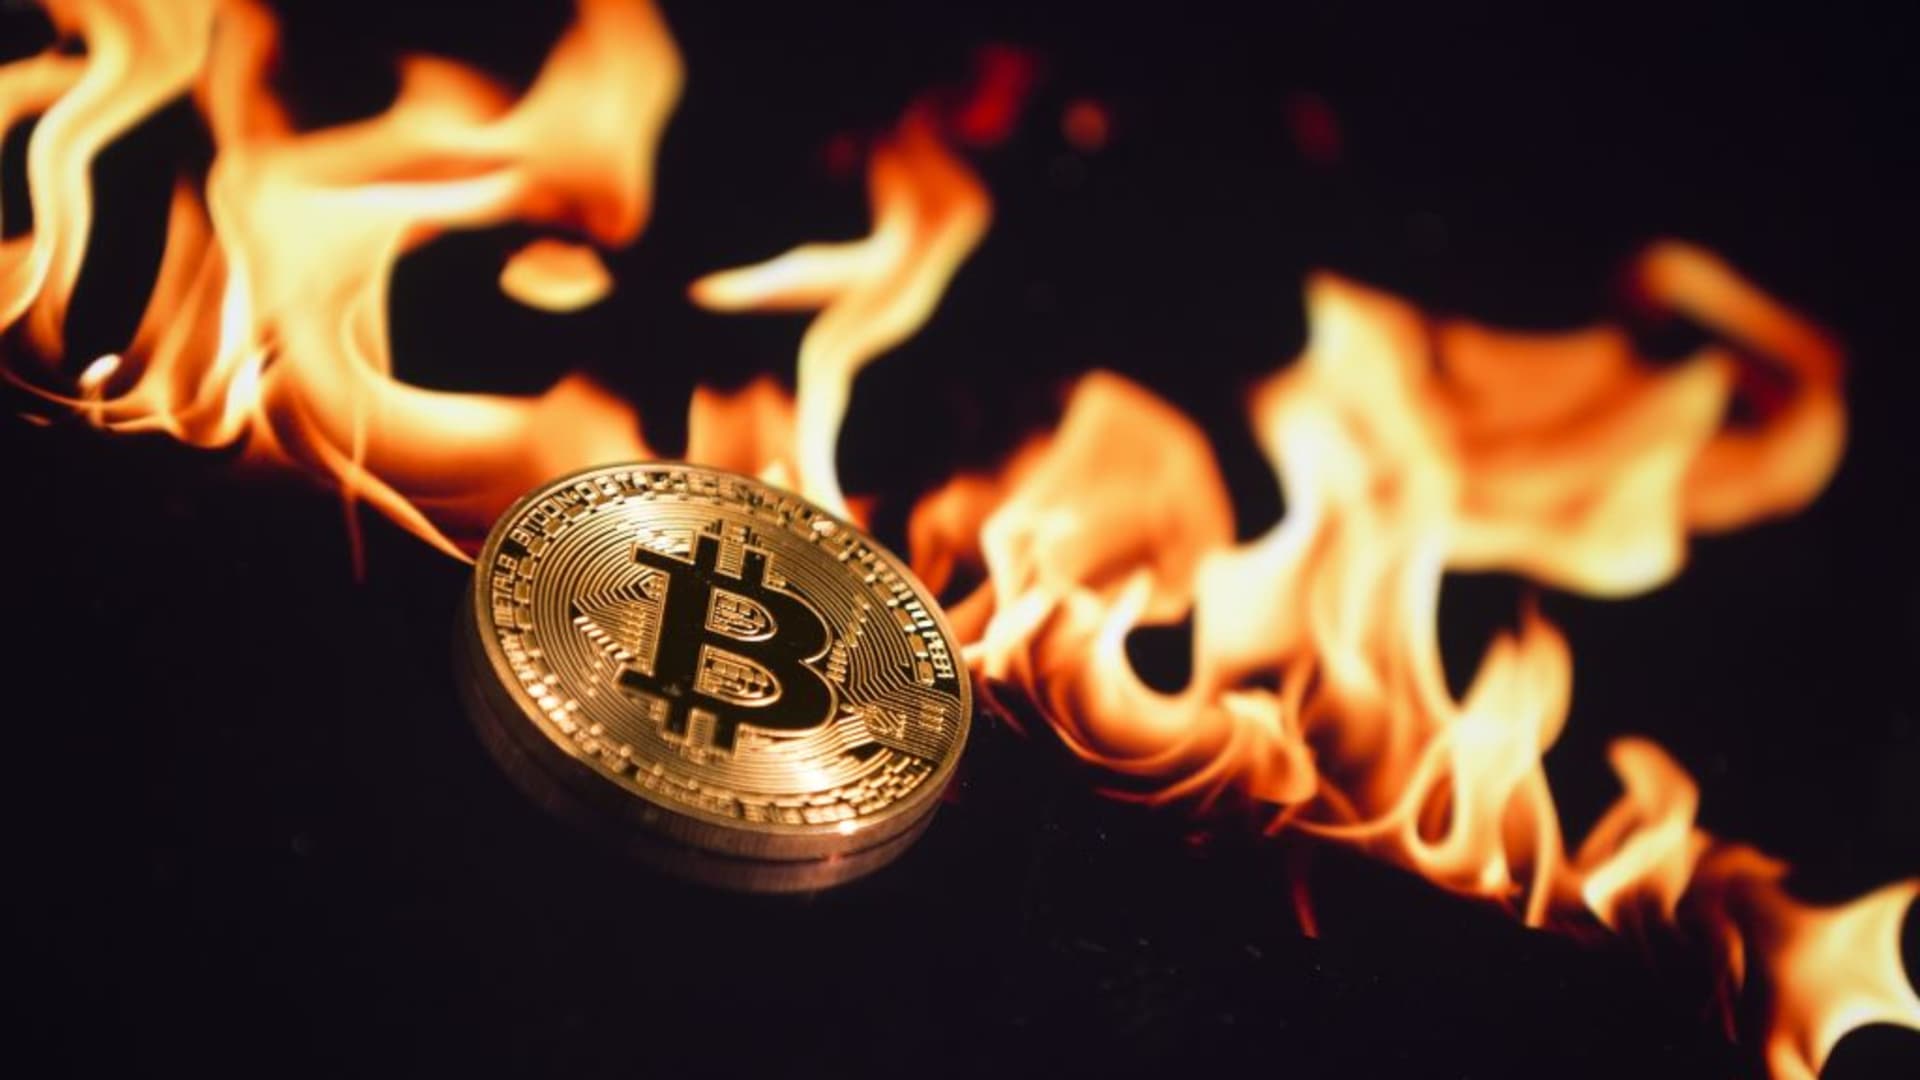 Bitcoin (BTC) posts worst quarter in more than a decade: 5 reasons why